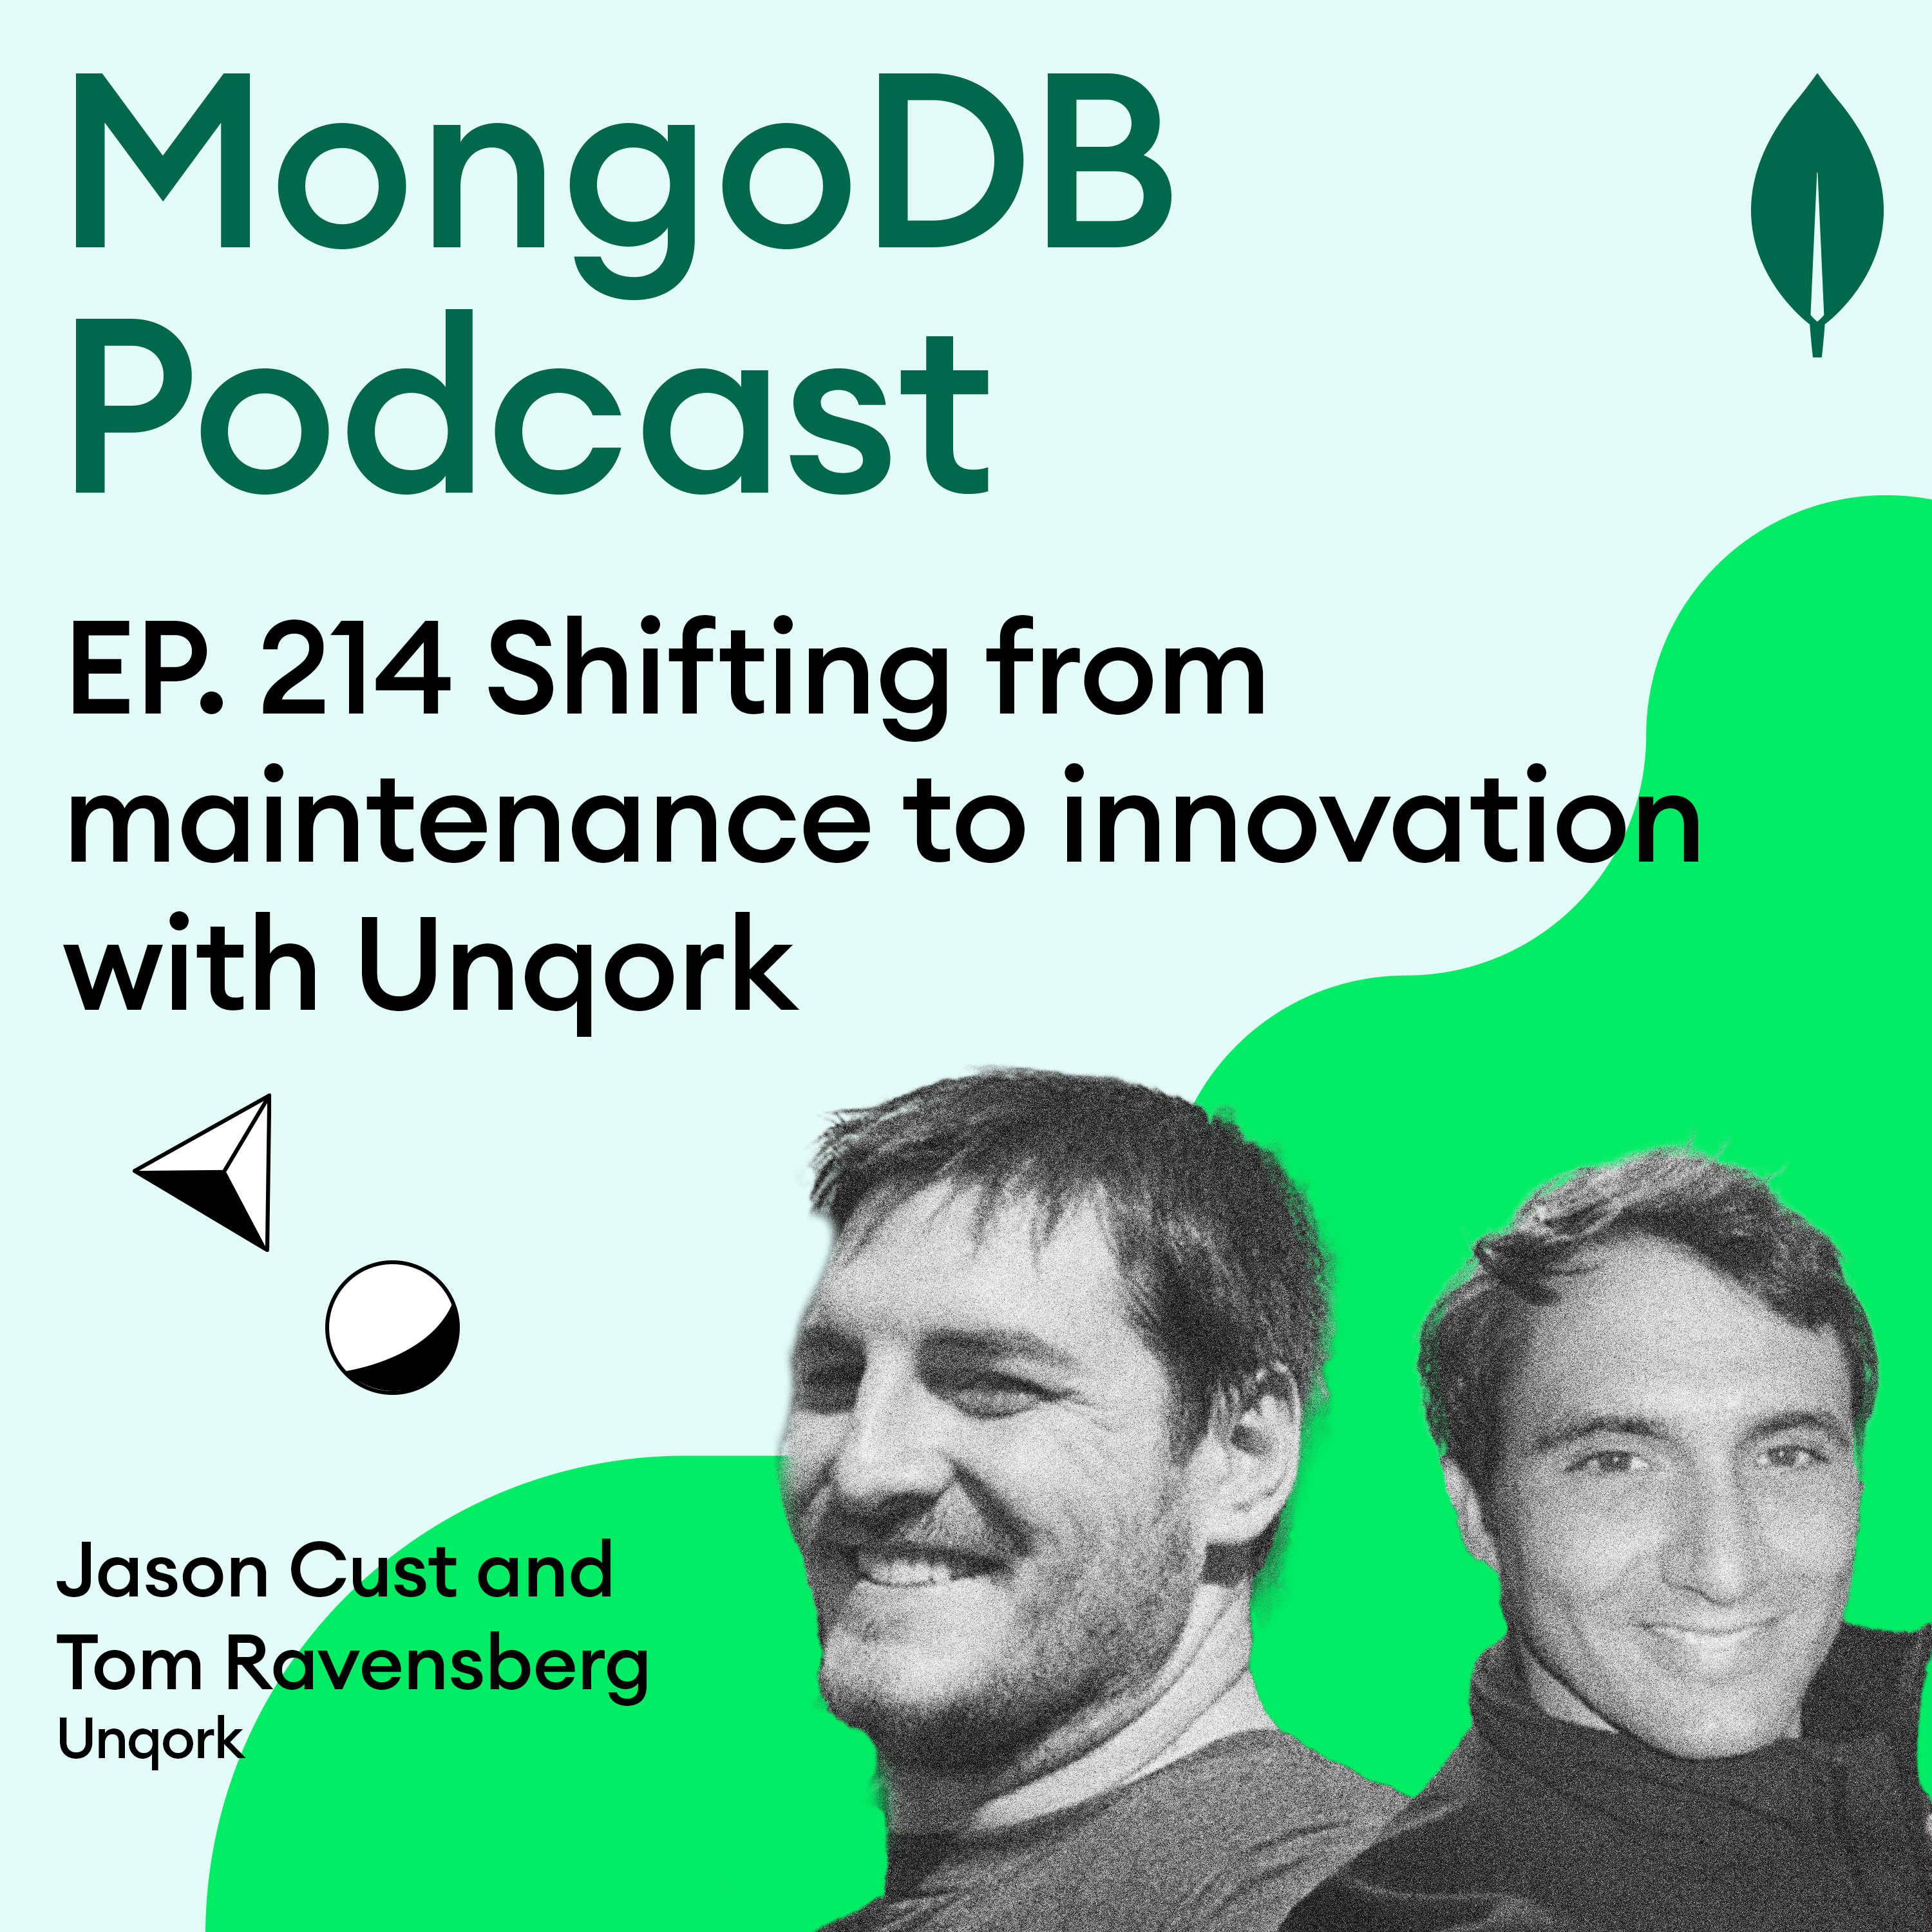 EP. 214 Shifting from maintenance to innovation